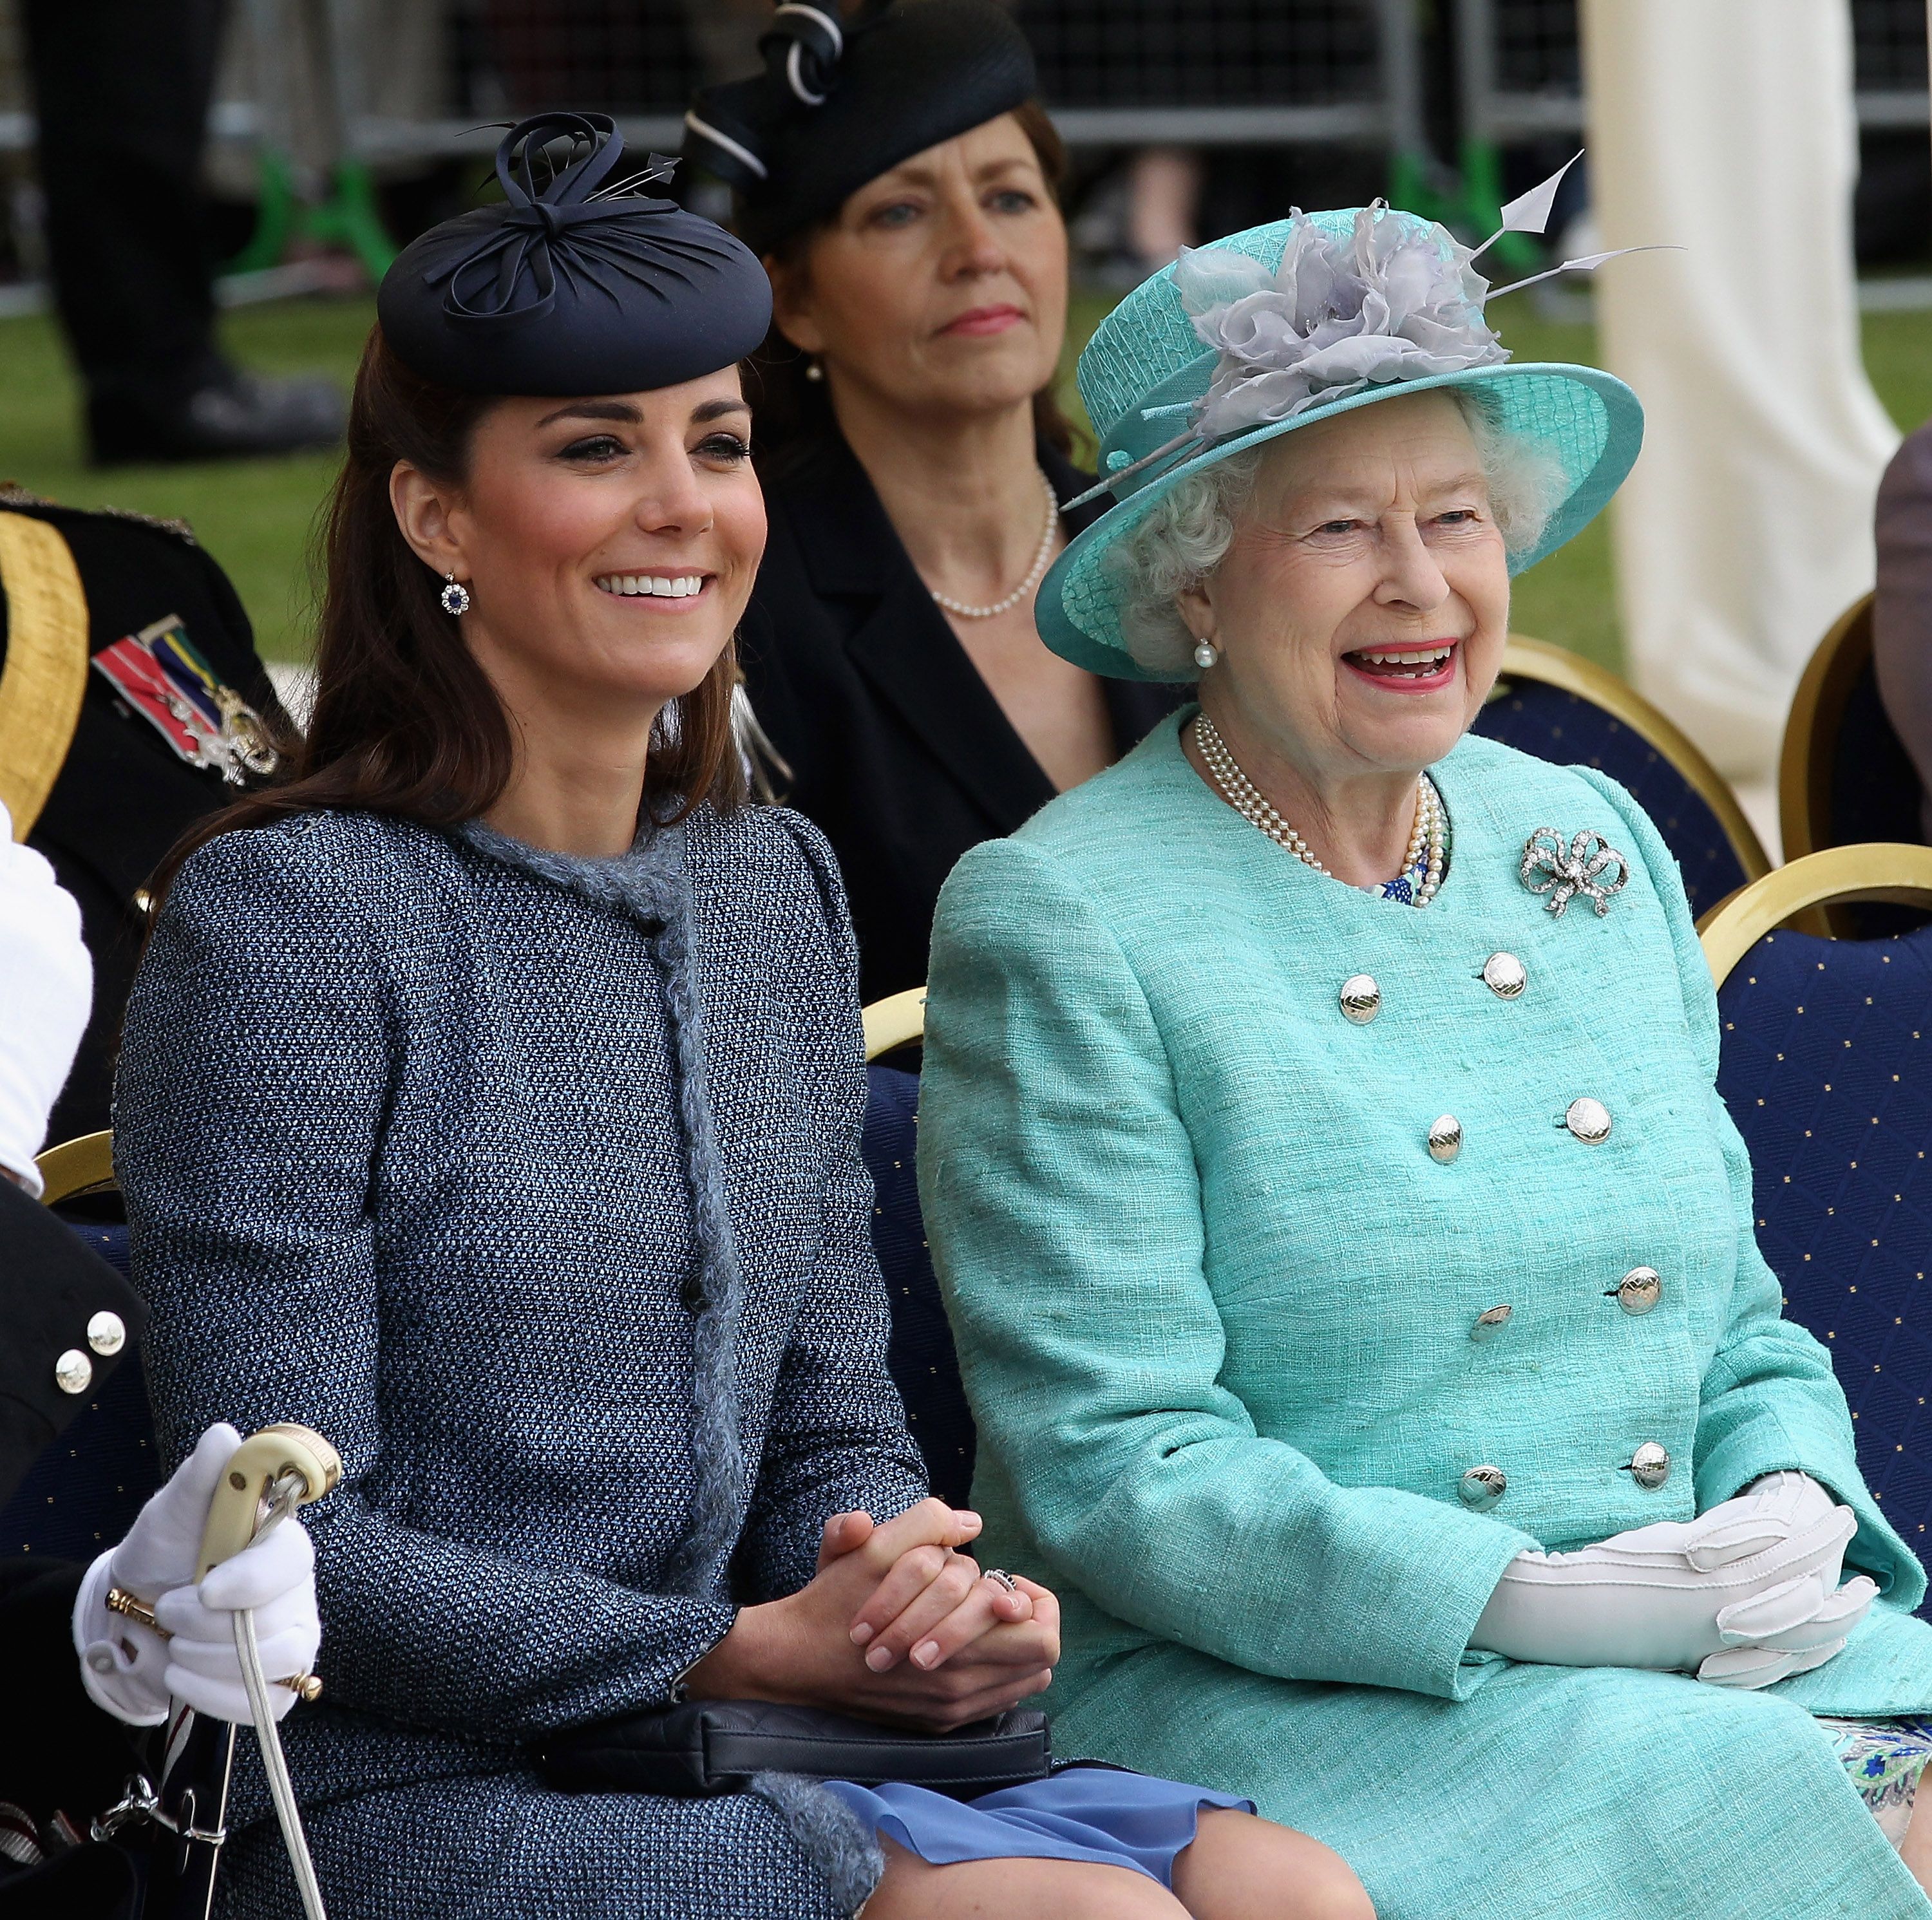 Catherine Middleton and Queen Elizabeth II smile as they visit Vernon Park during a Diamond Jubilee visit to Nottingham on June 13, 2012 in Nottingham, England. | Source: Getty Images